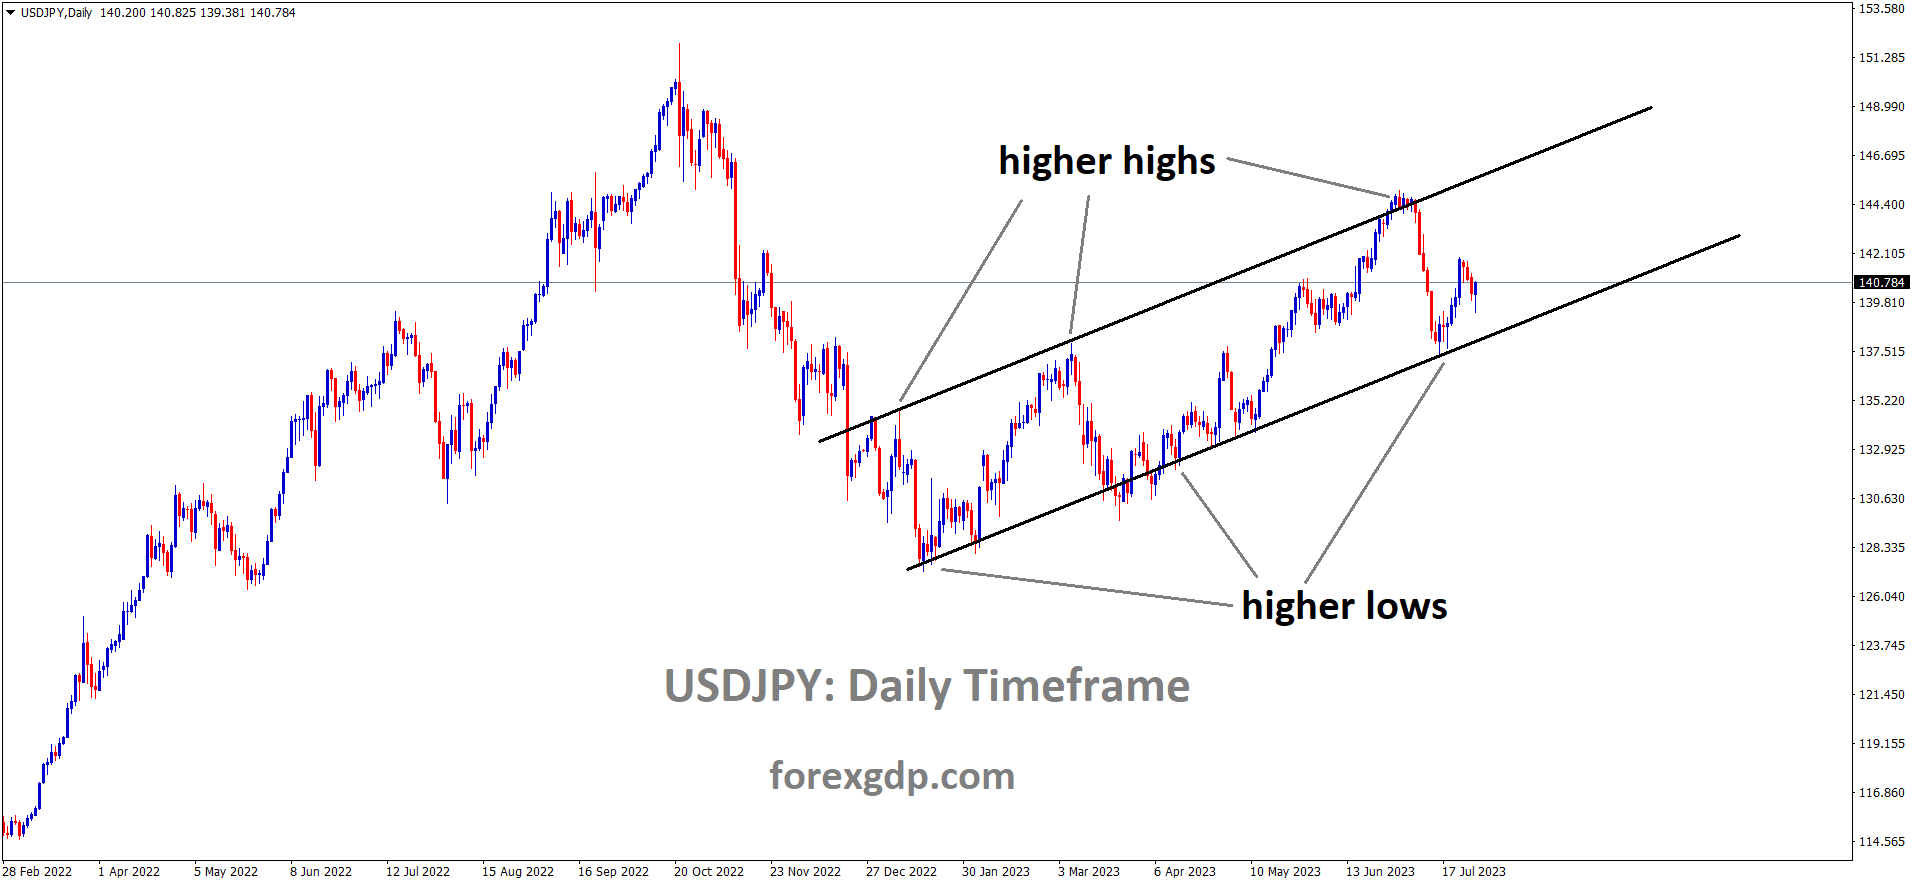 USDJPY Daily TF analysis Market is moving in an Ascending channel and the market has rebounded from the higher low area of the channel 1